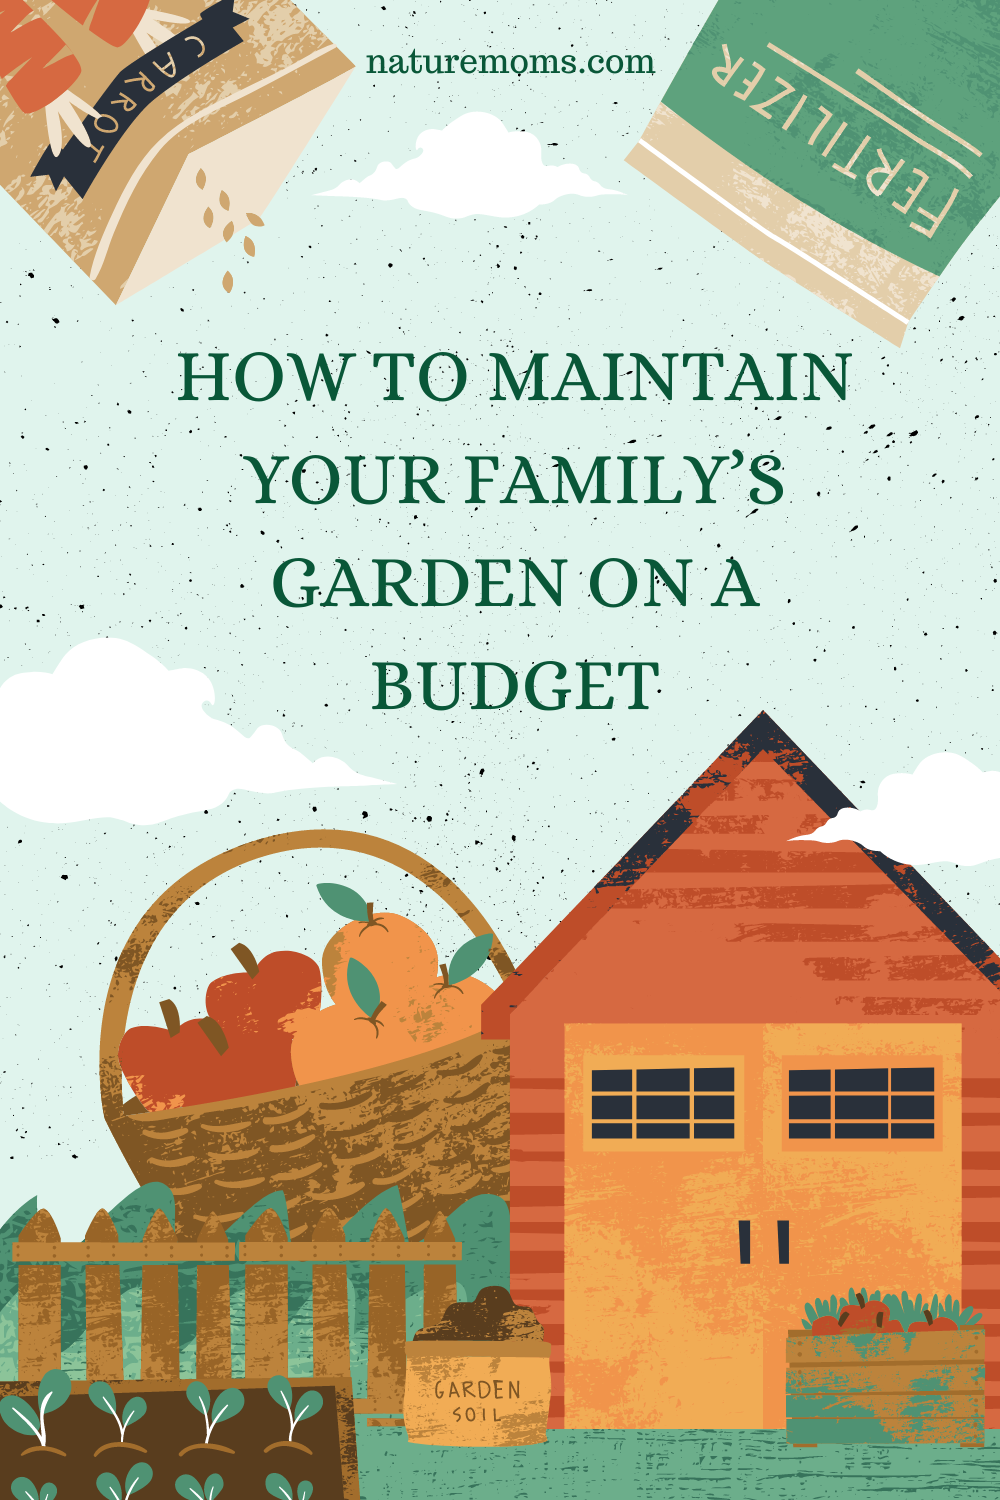 Maintain your garden on a strict budget